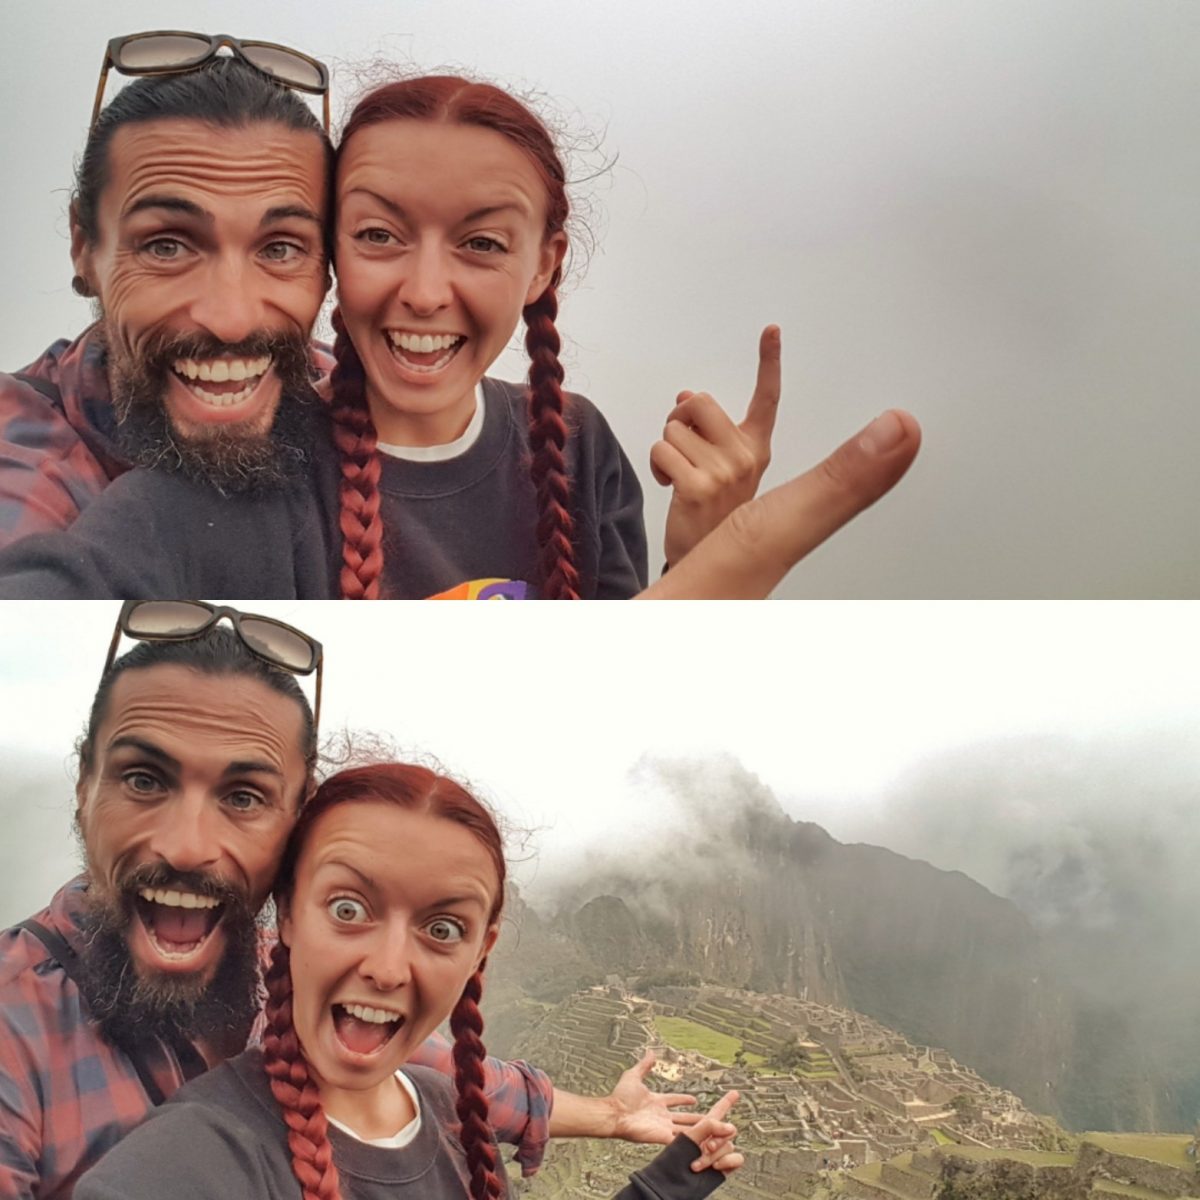 <img src="images/" width="800" height="600" alt="[object object] - wp image 1013348120 - Peru: Our DIY Hike To Machu Picchu">